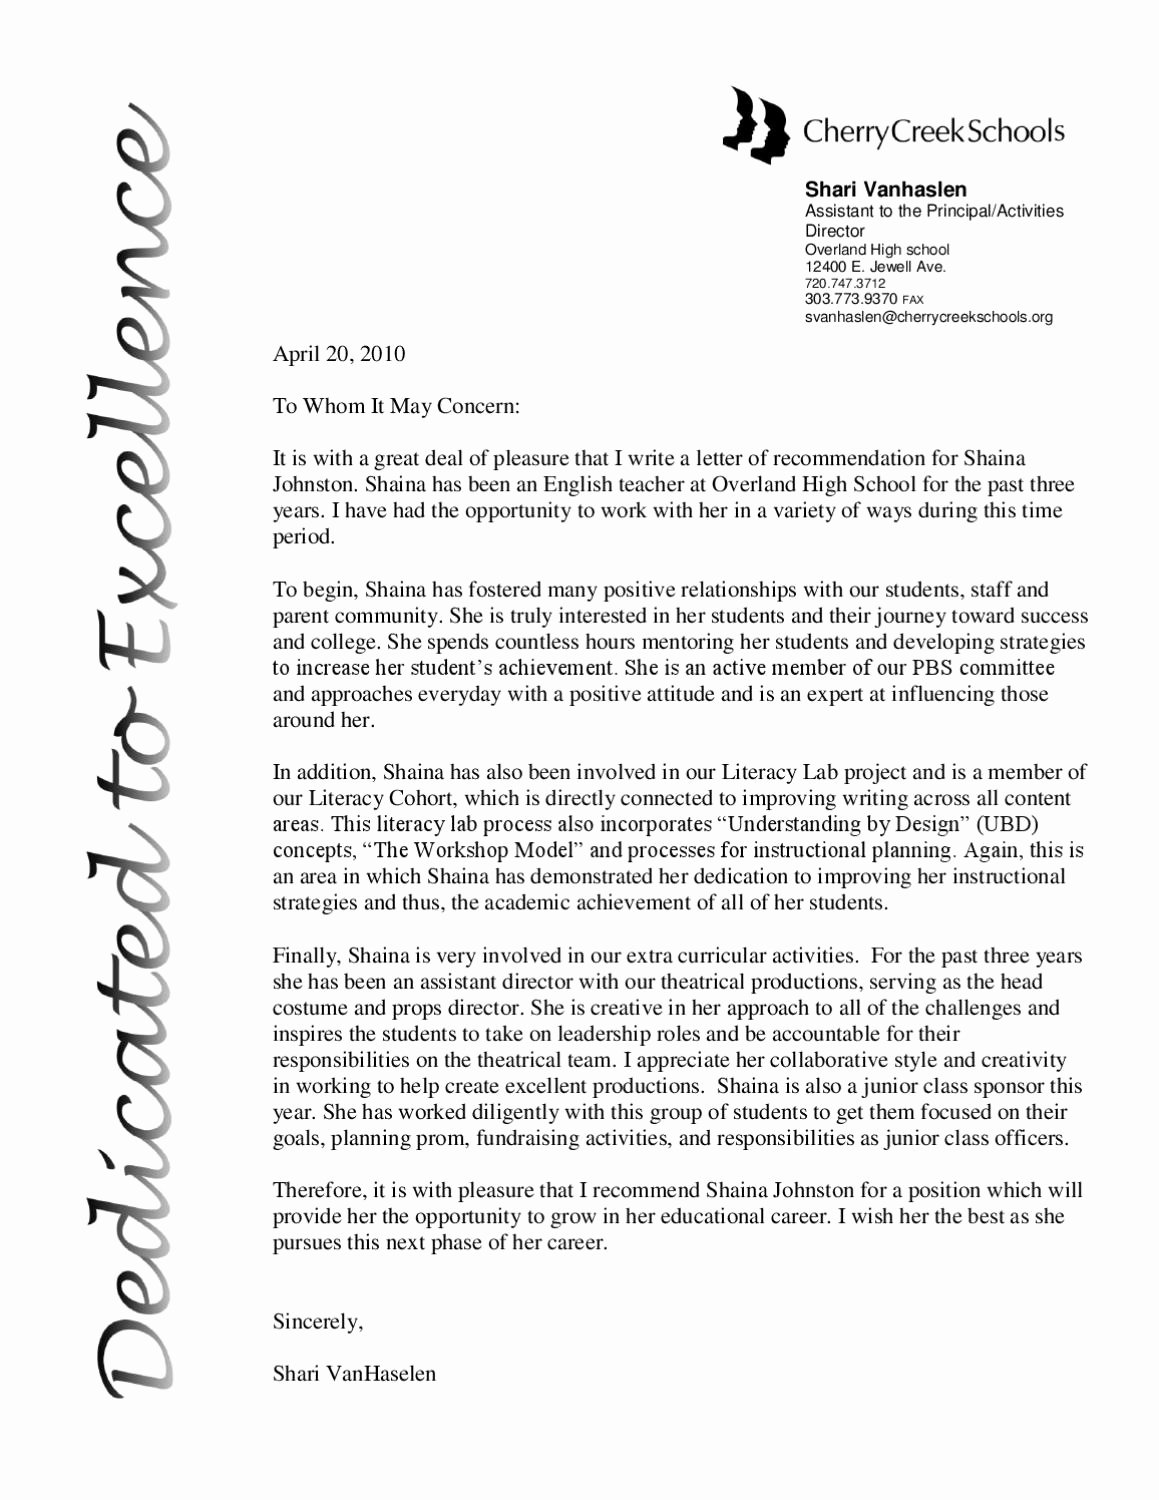 Tenure Recommendation Letter From Student Lovely Letter Of Rec From assistant Principal by Shaina Johnston